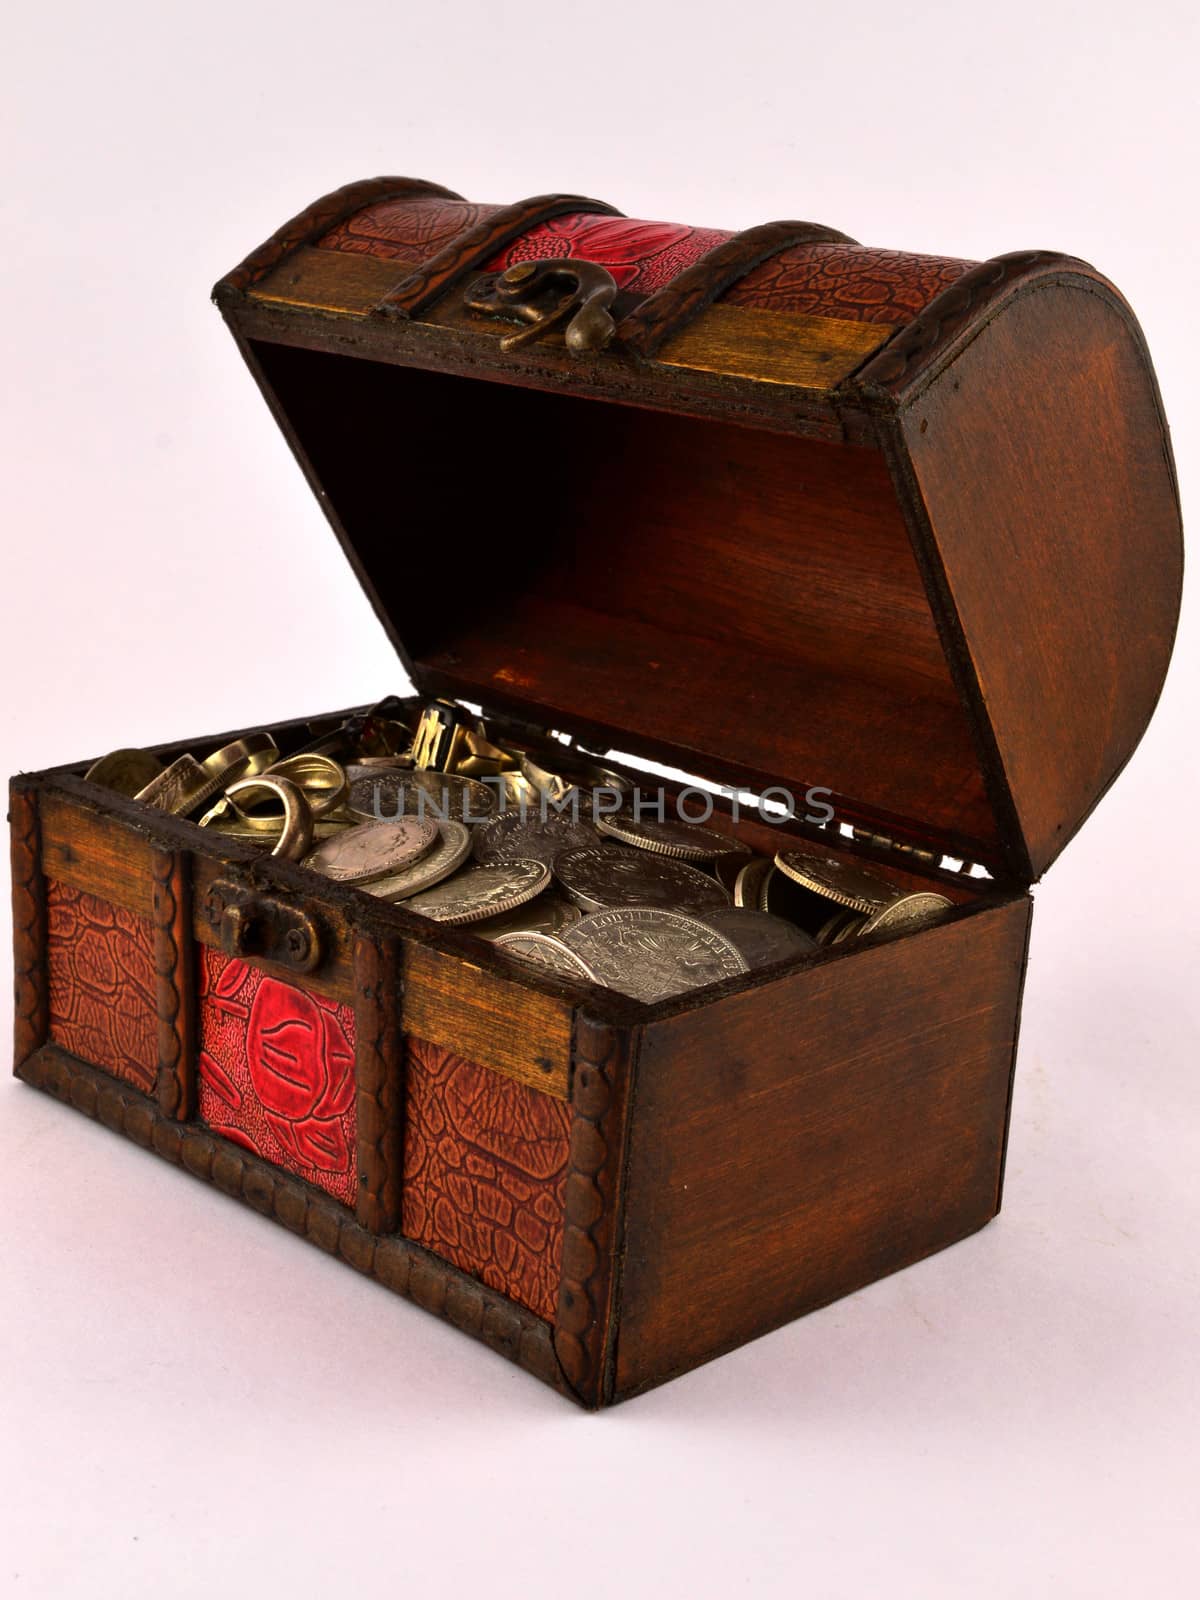 Treasure Chest With Silver coins on white background.